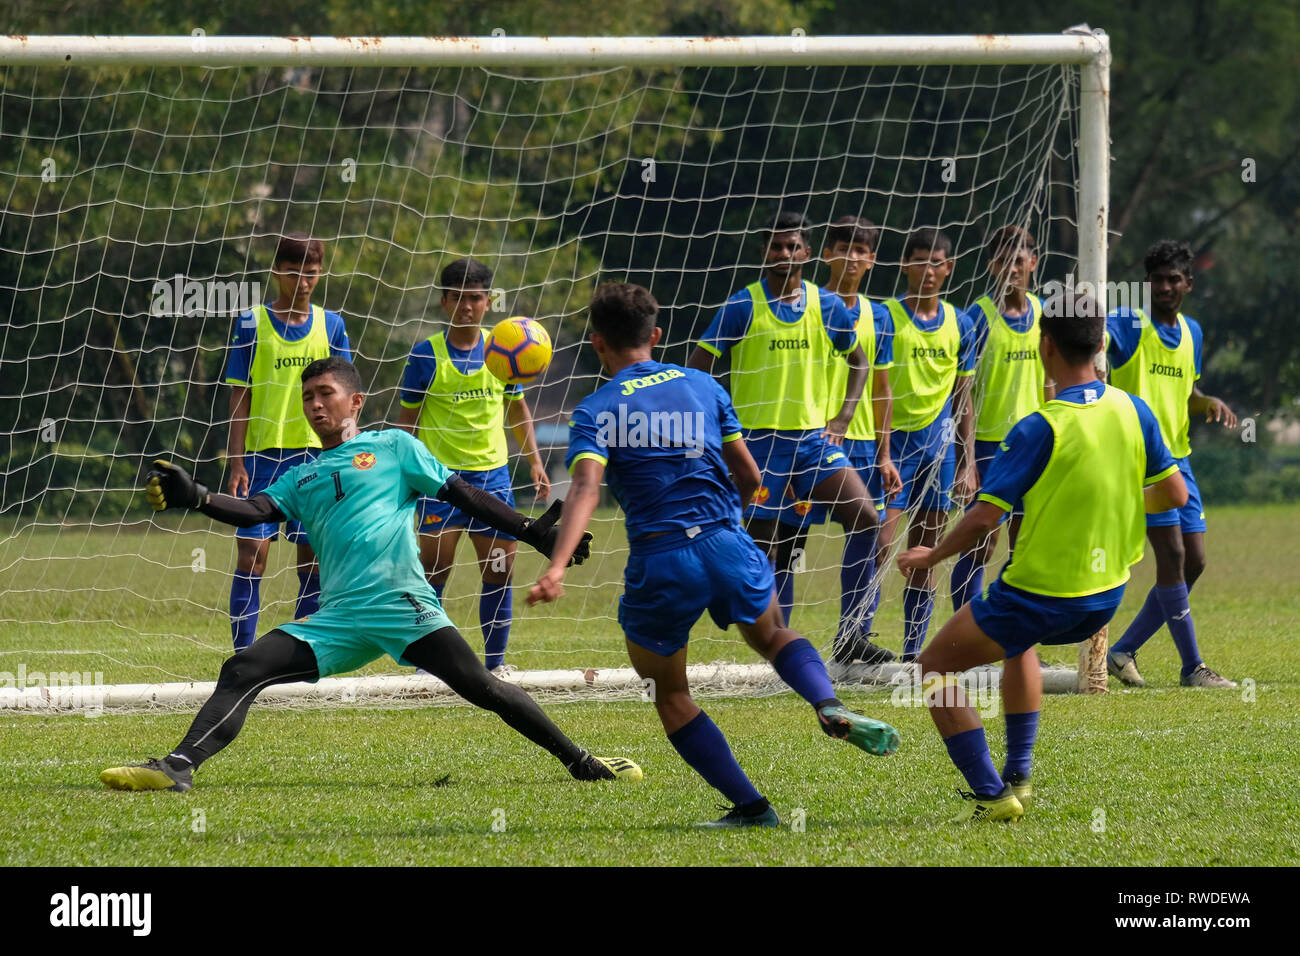 Selangor U-19 football players are seen in action during the training session. Michael Owen the former England international football star has been in Malaysia for a promotional visit and share his tips and experiences with the Selangor U-19 team organised by Cadbury. Stock Photo